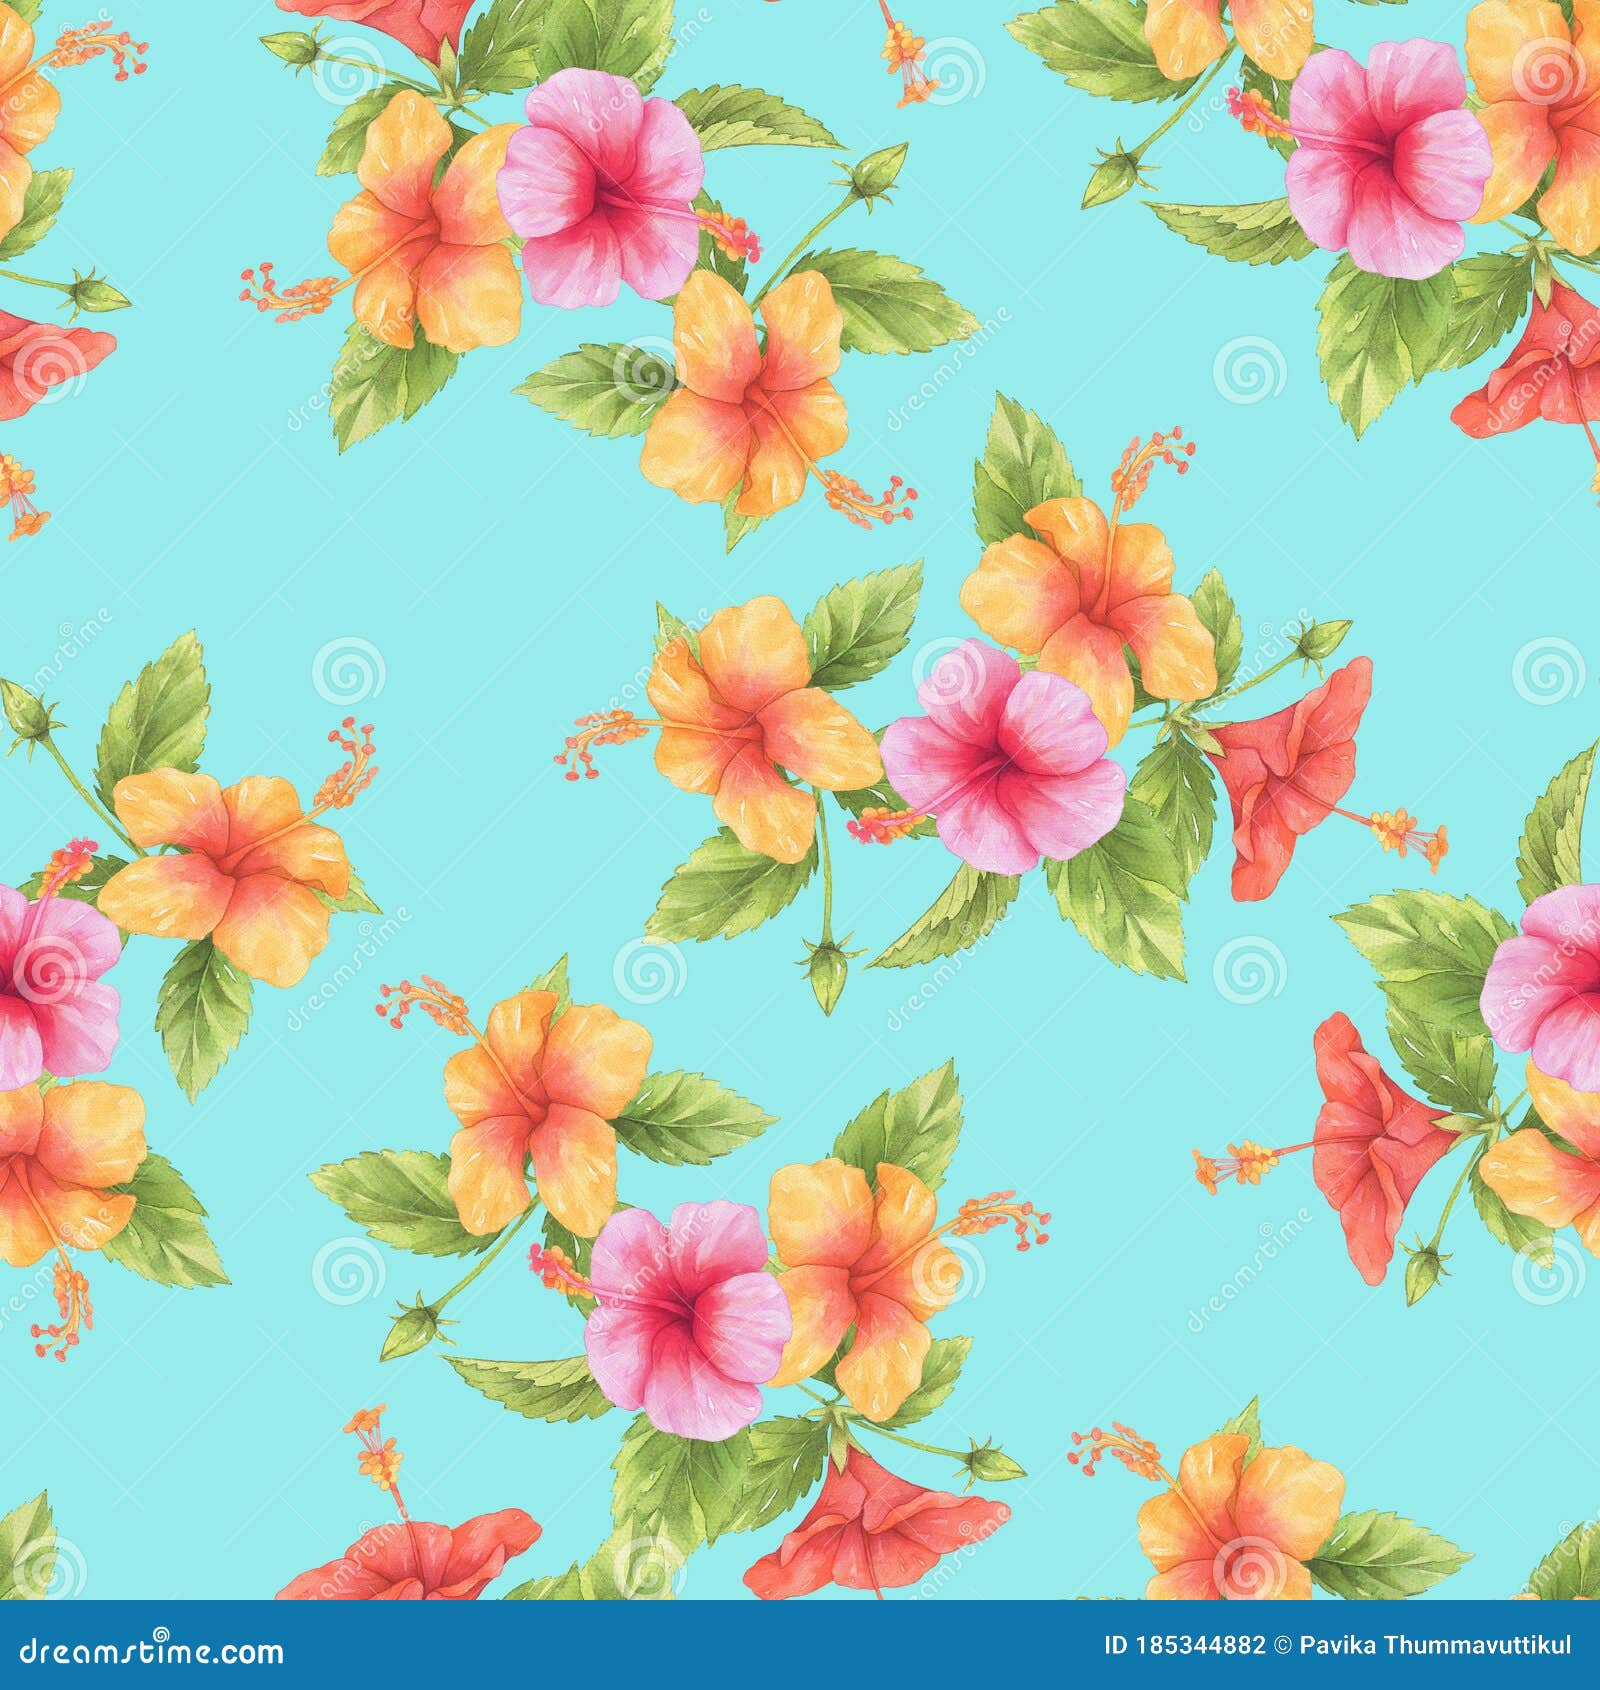 Hibiscus Flower Watercolor Pattern on Blue Wallpaper Stock Illustration -  Illustration of drawn, object: 185344882